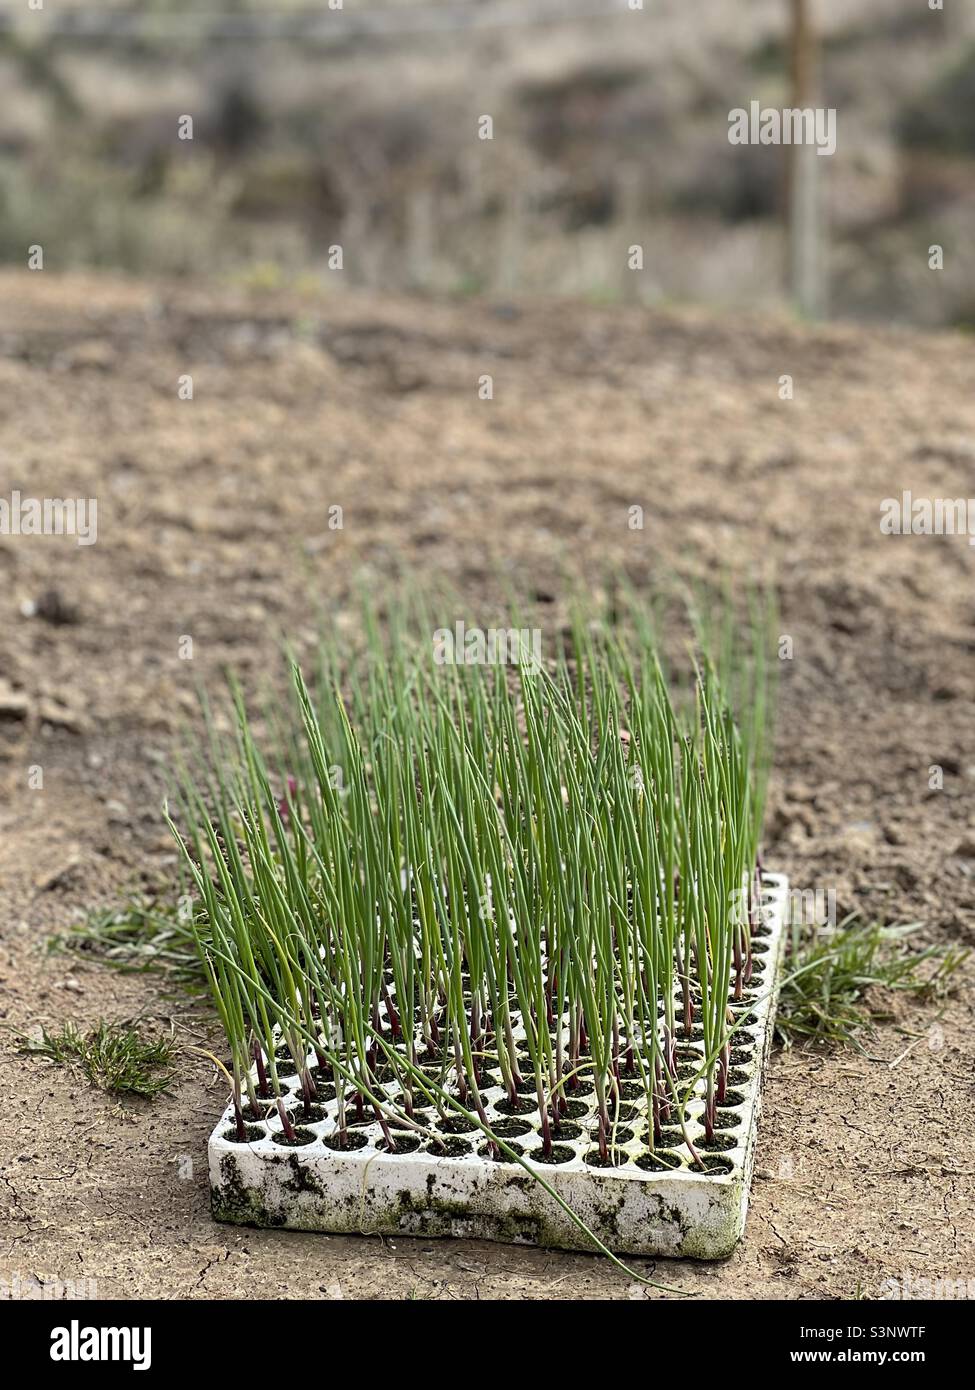 Onion seedlings ready to be planted Stock Photo